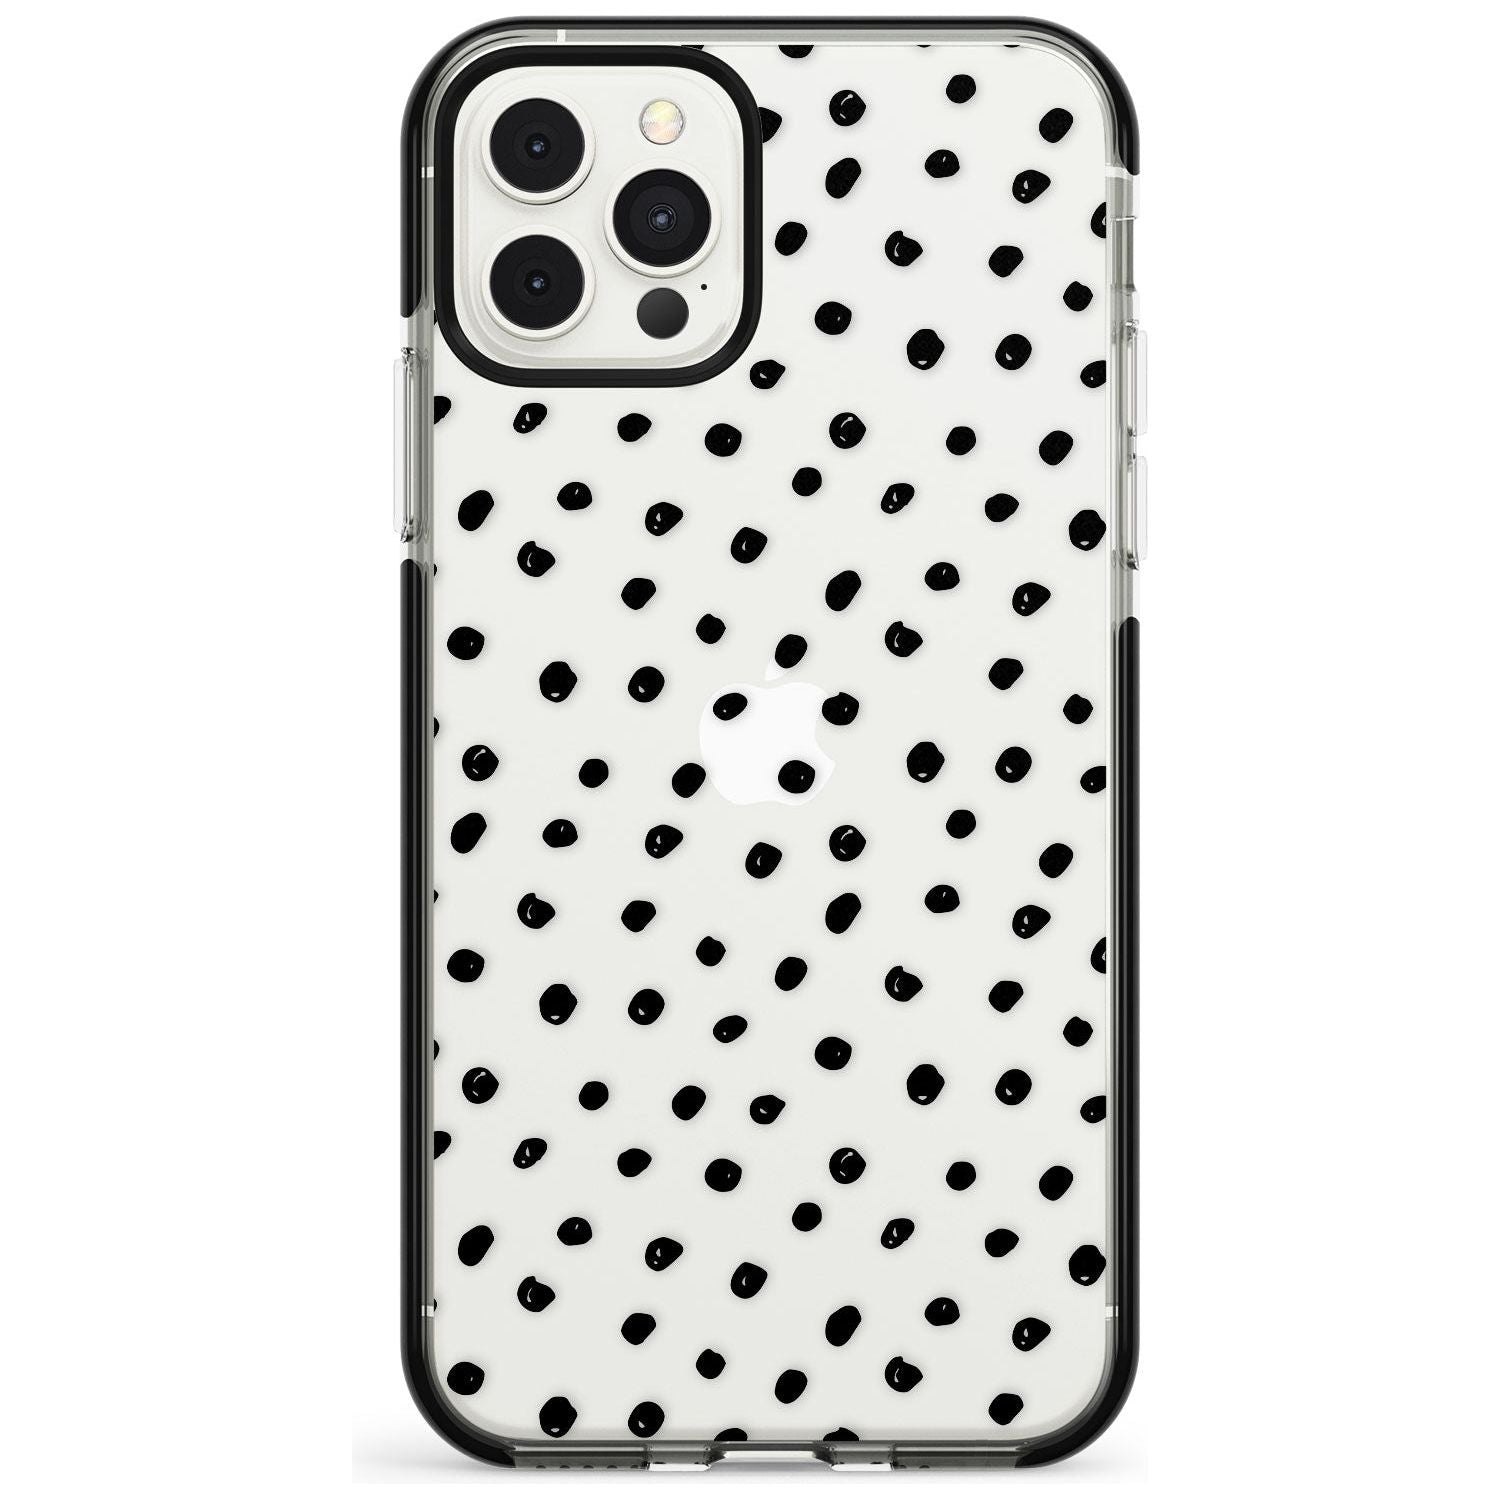 Messy Black Dot Pattern Pink Fade Impact Phone Case for iPhone 11